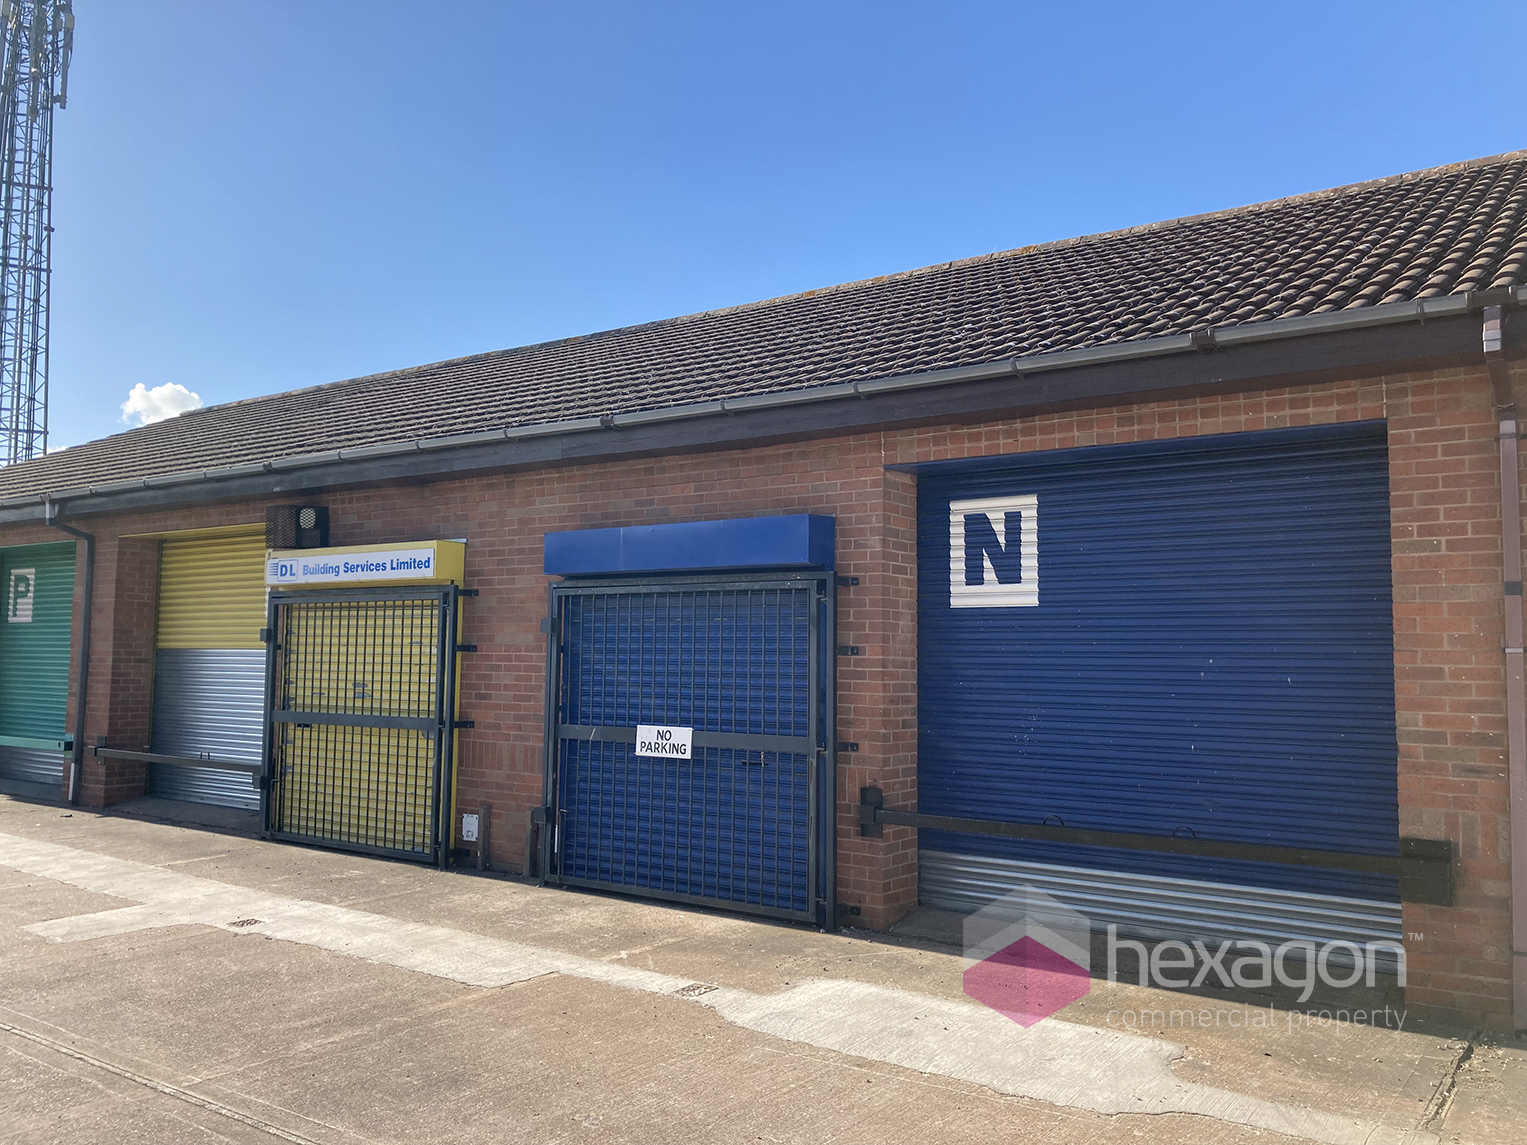 Light Industrial for rent in Brierley Hill. From Hexagon Commercial Property